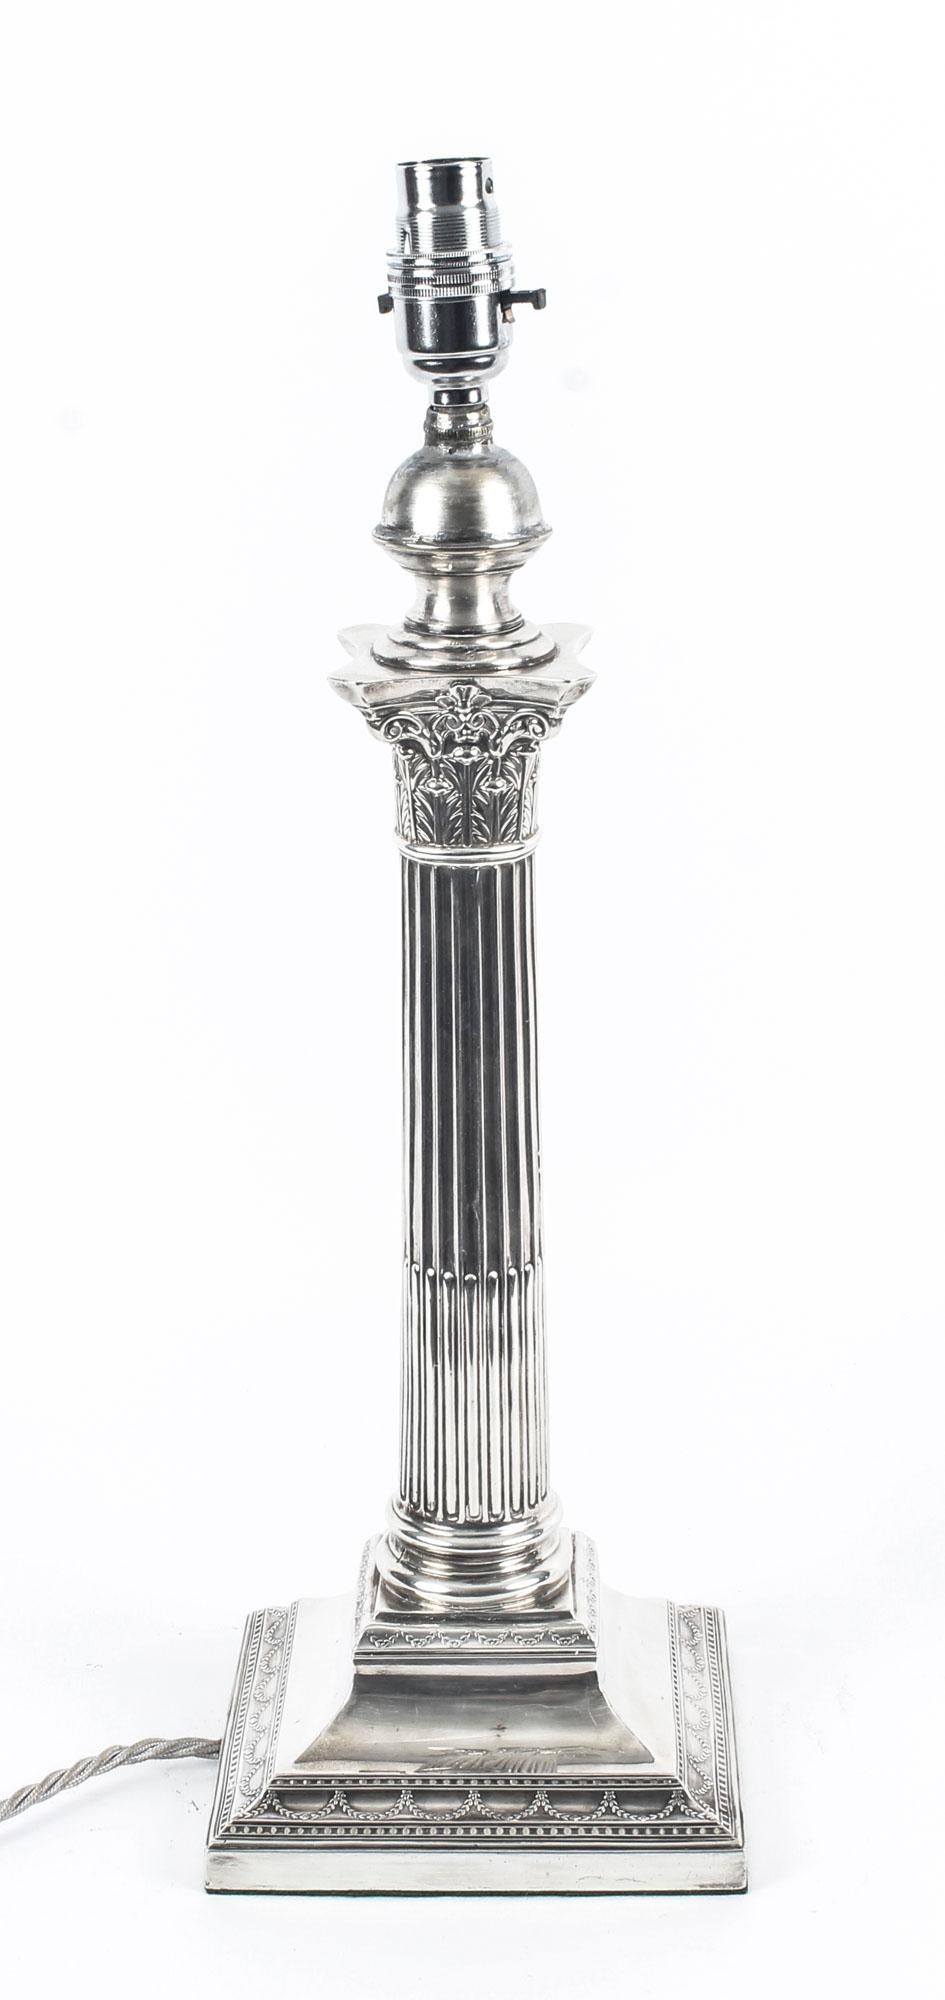 This is an impressive large antique Edwardian sterling silver Corinthian column table lamp bearing hallmarks for Sheffield 1908 and the makers mark of the renowned silversmith Hawksworth, Eyre & Co Ltd.

It features a classic Corinthian Capital